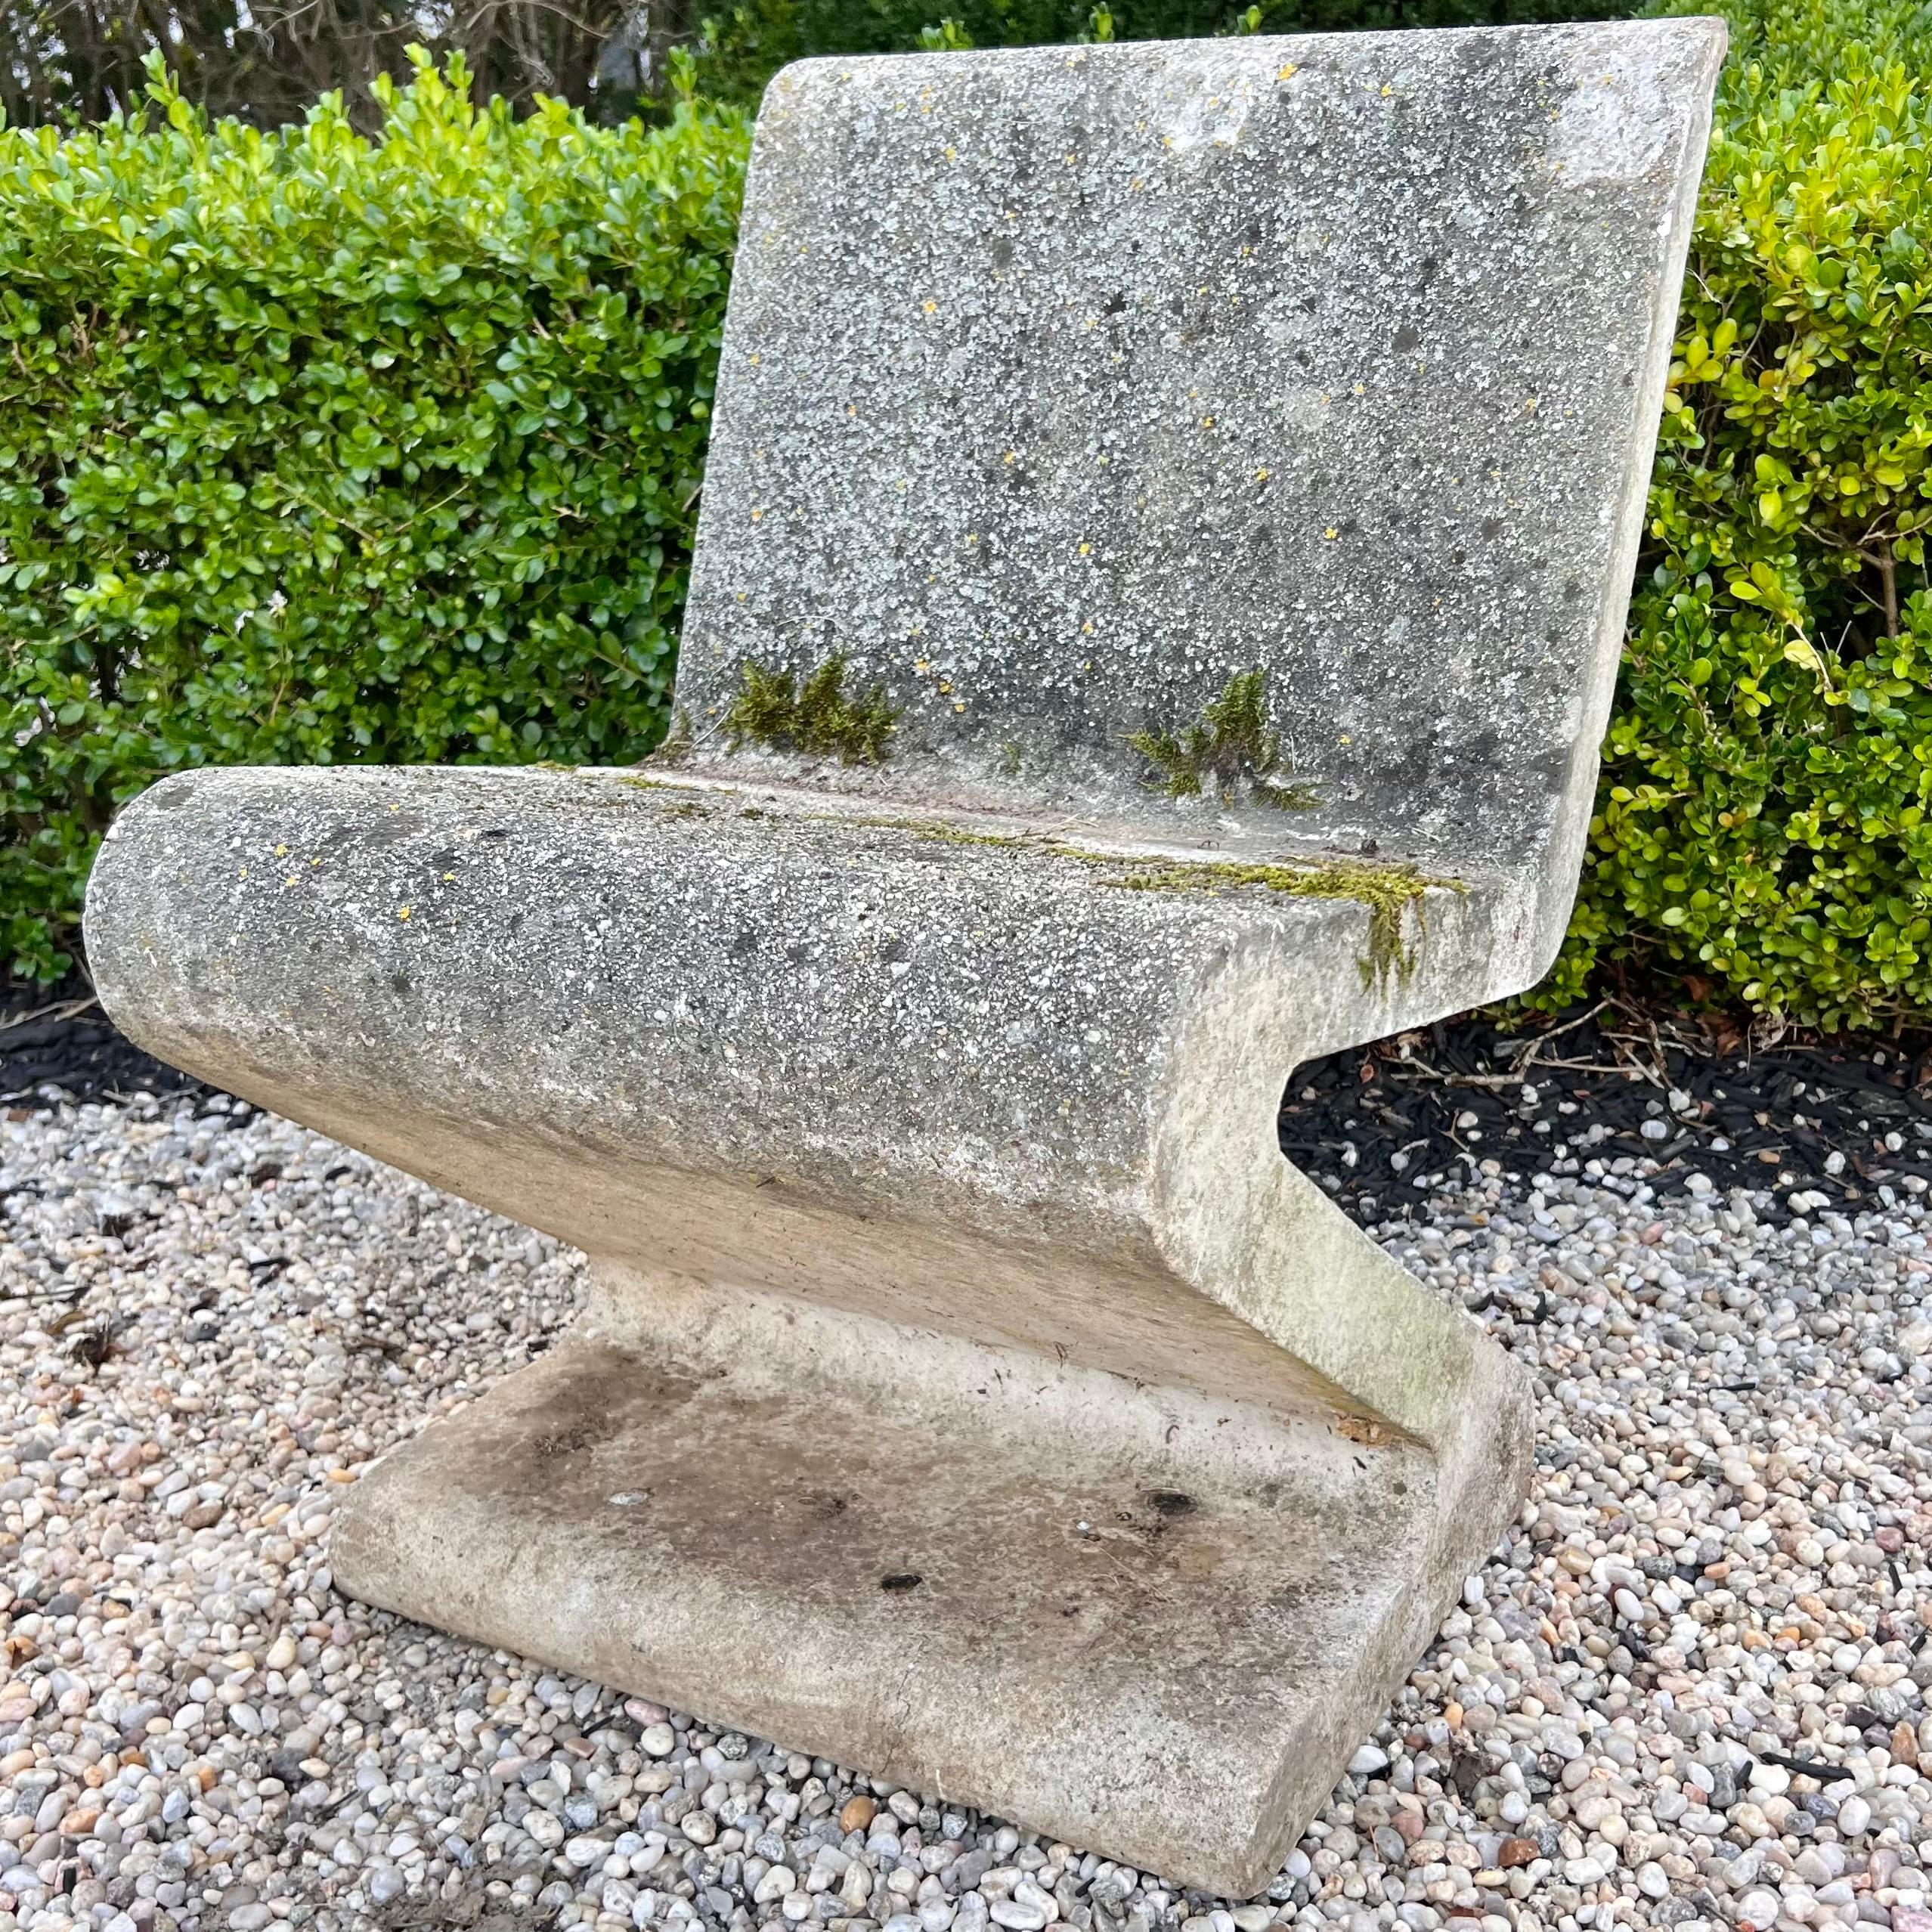 Substantial set of concrete zig zag chairs. Exceptional presence. Stunning presence and design. Industrial steel rebar runs inside the concrete reinforcing the chair and table giving them extra strength. Reminiscent of the Rietveld Zig Zag chairs,